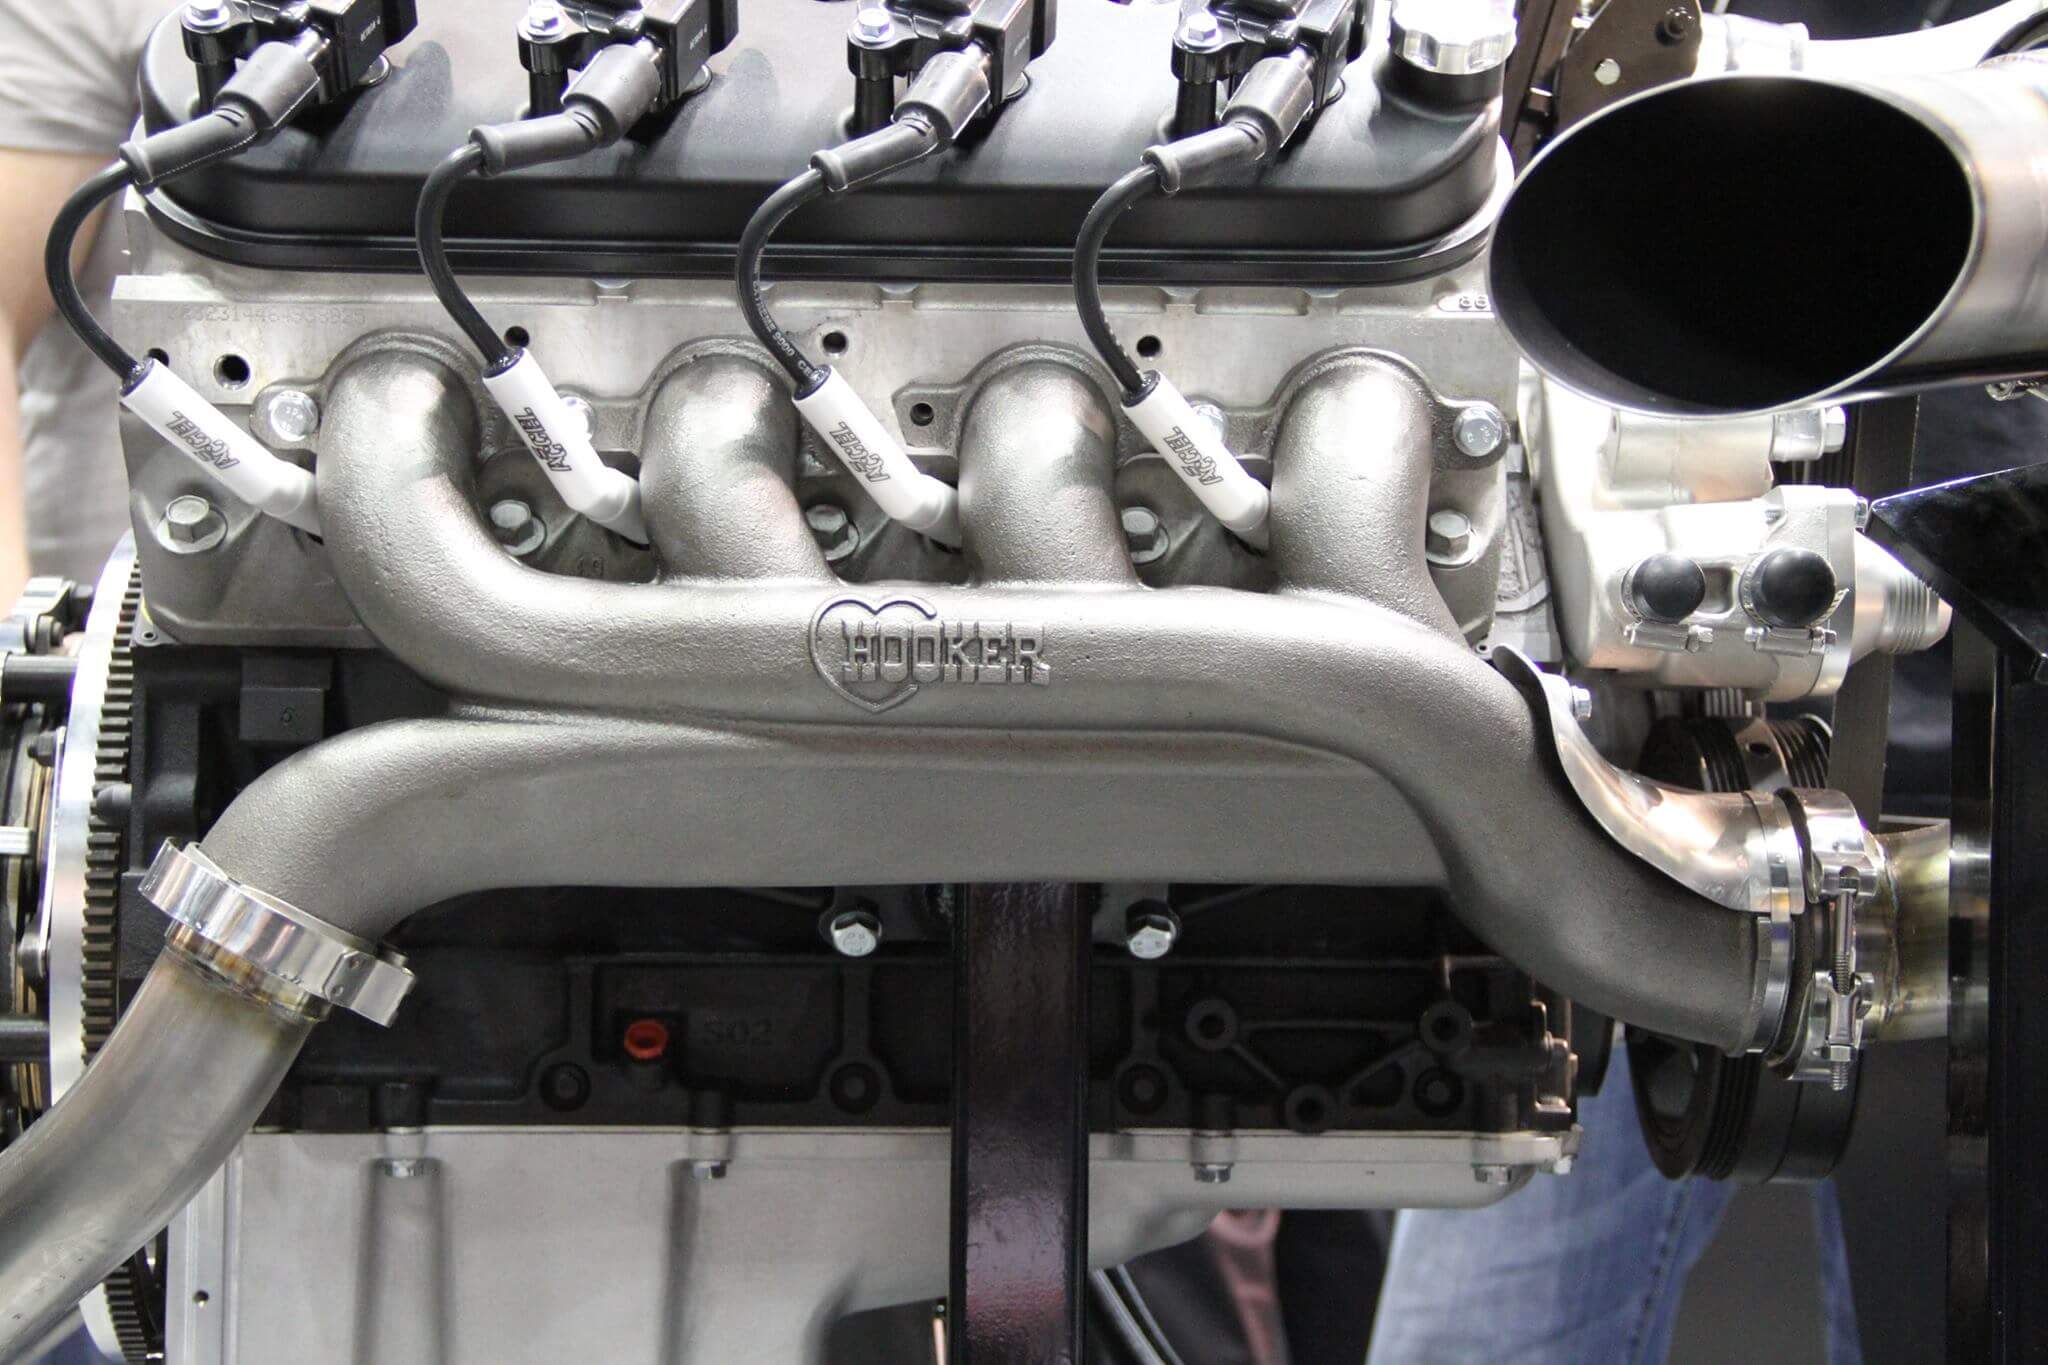 NEW FLOWTECH LS TURBO HEADERS,NATURAL FINISH,1.875 INCH TUBE DIAMETERS,3 COLLECTORS,COMPATIBLE WITH GM LS ENGINES 